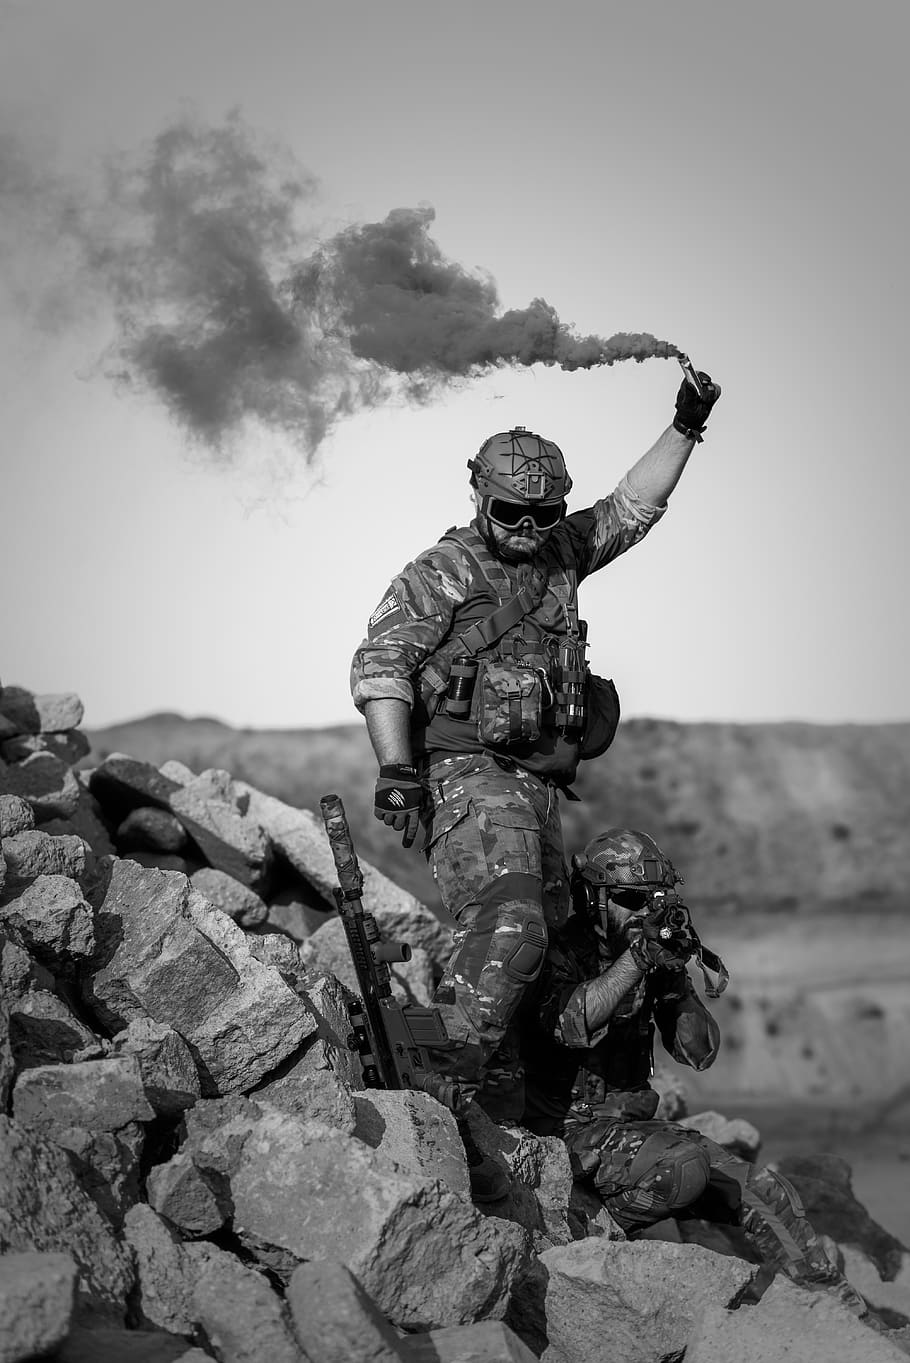 Man Holding Signal Smoke, action, active, activity, adult, adventure